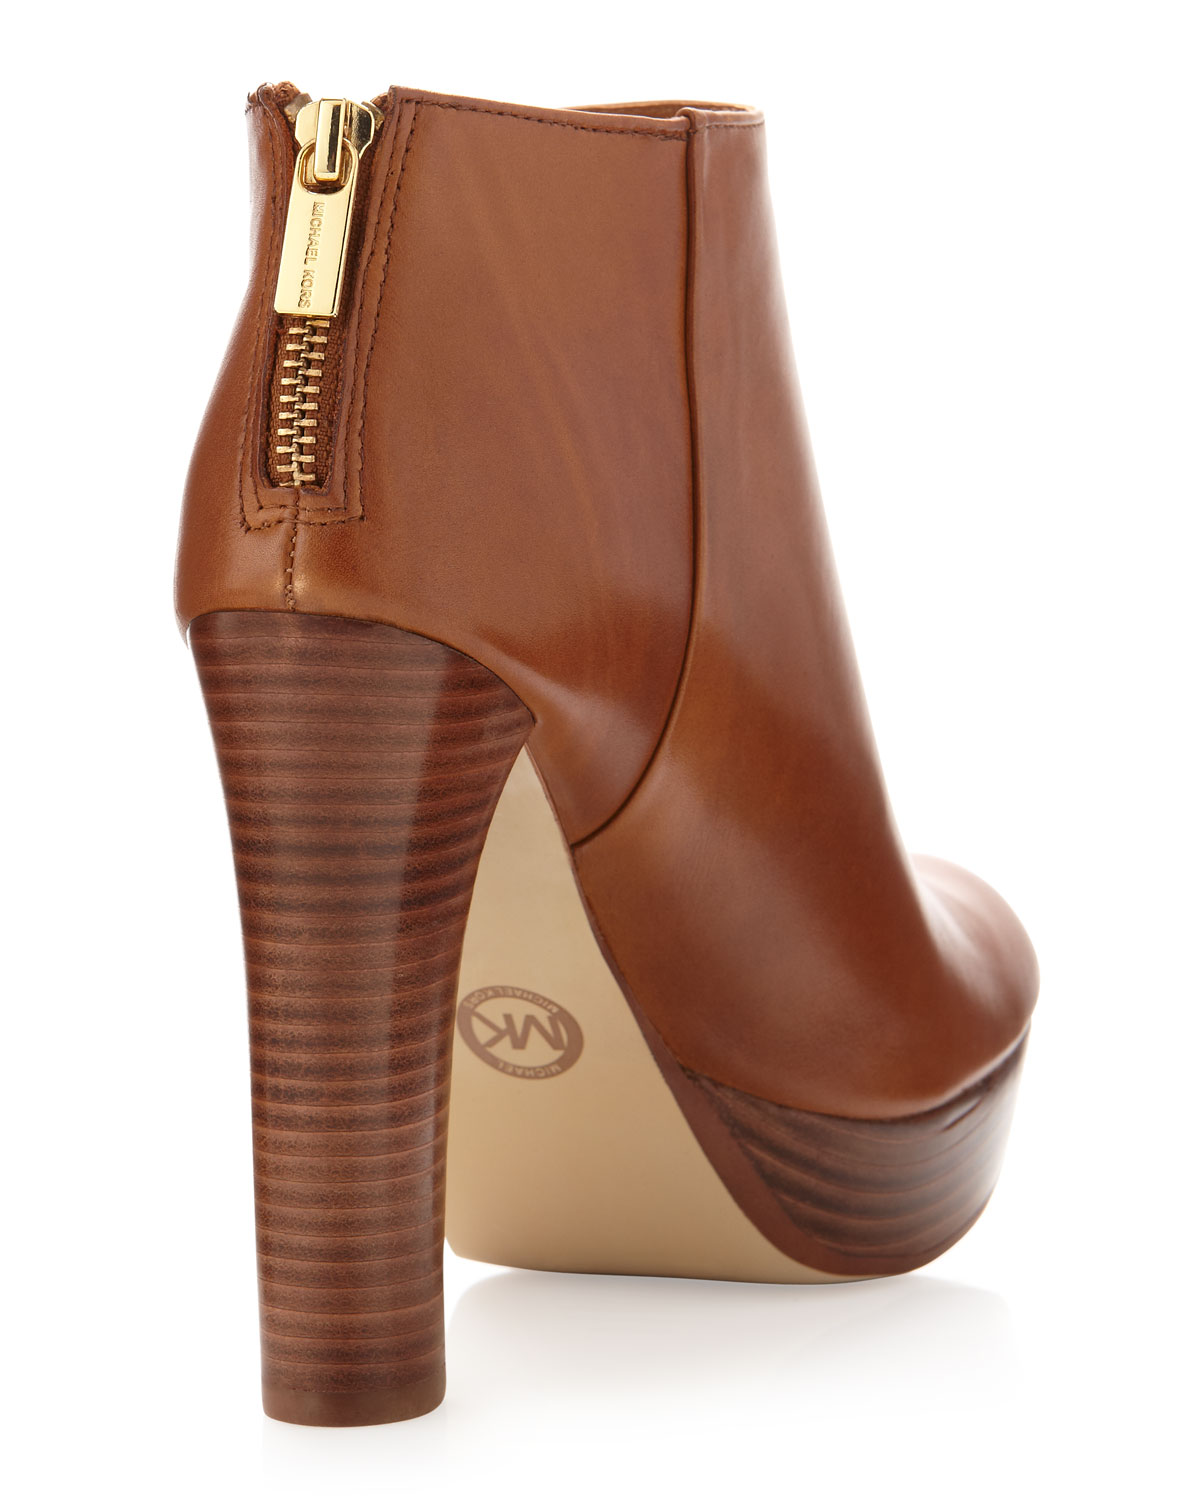 Michael Kors Lesly Ankle Boot in Almond (Brown) - Lyst